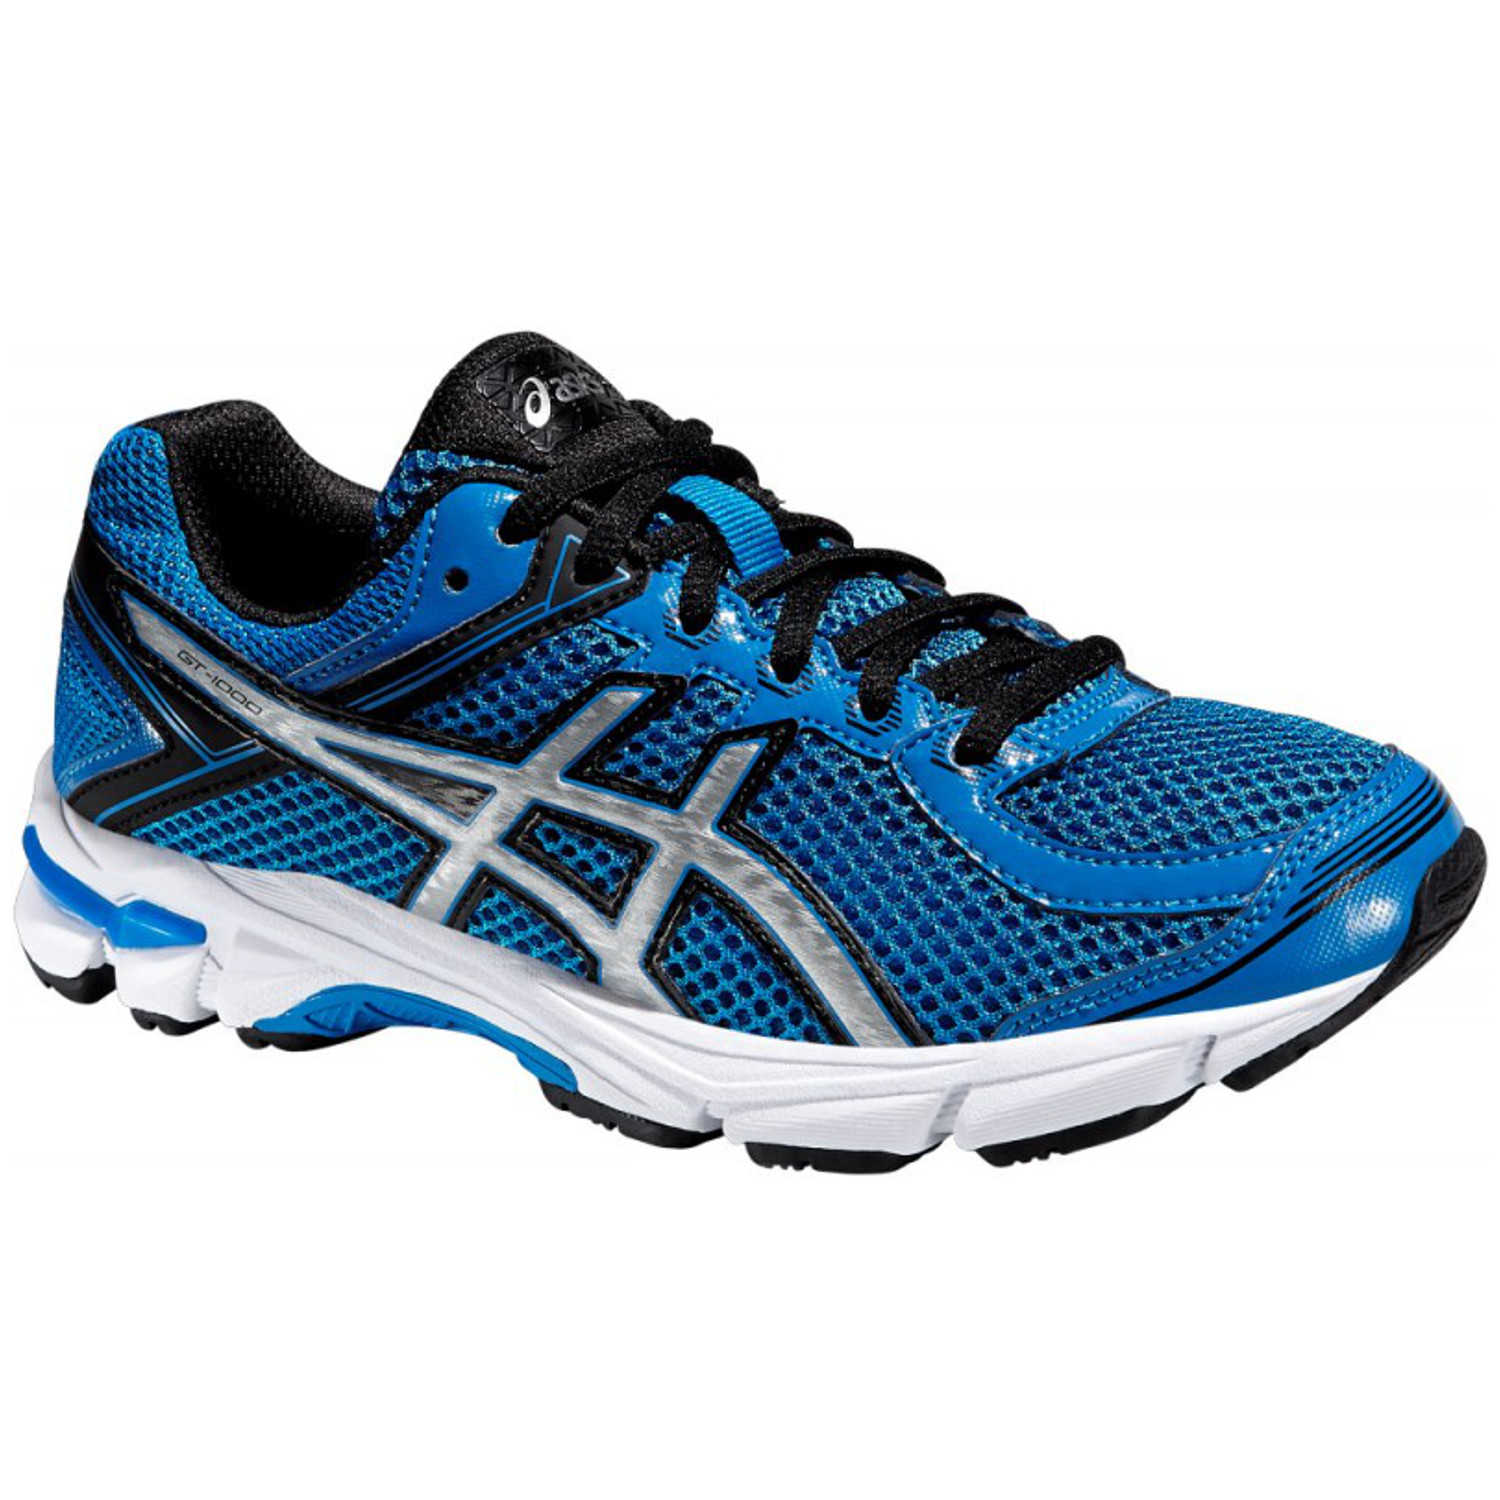 Chaussure Gt 1000 4 Gs electric blue-silver-black